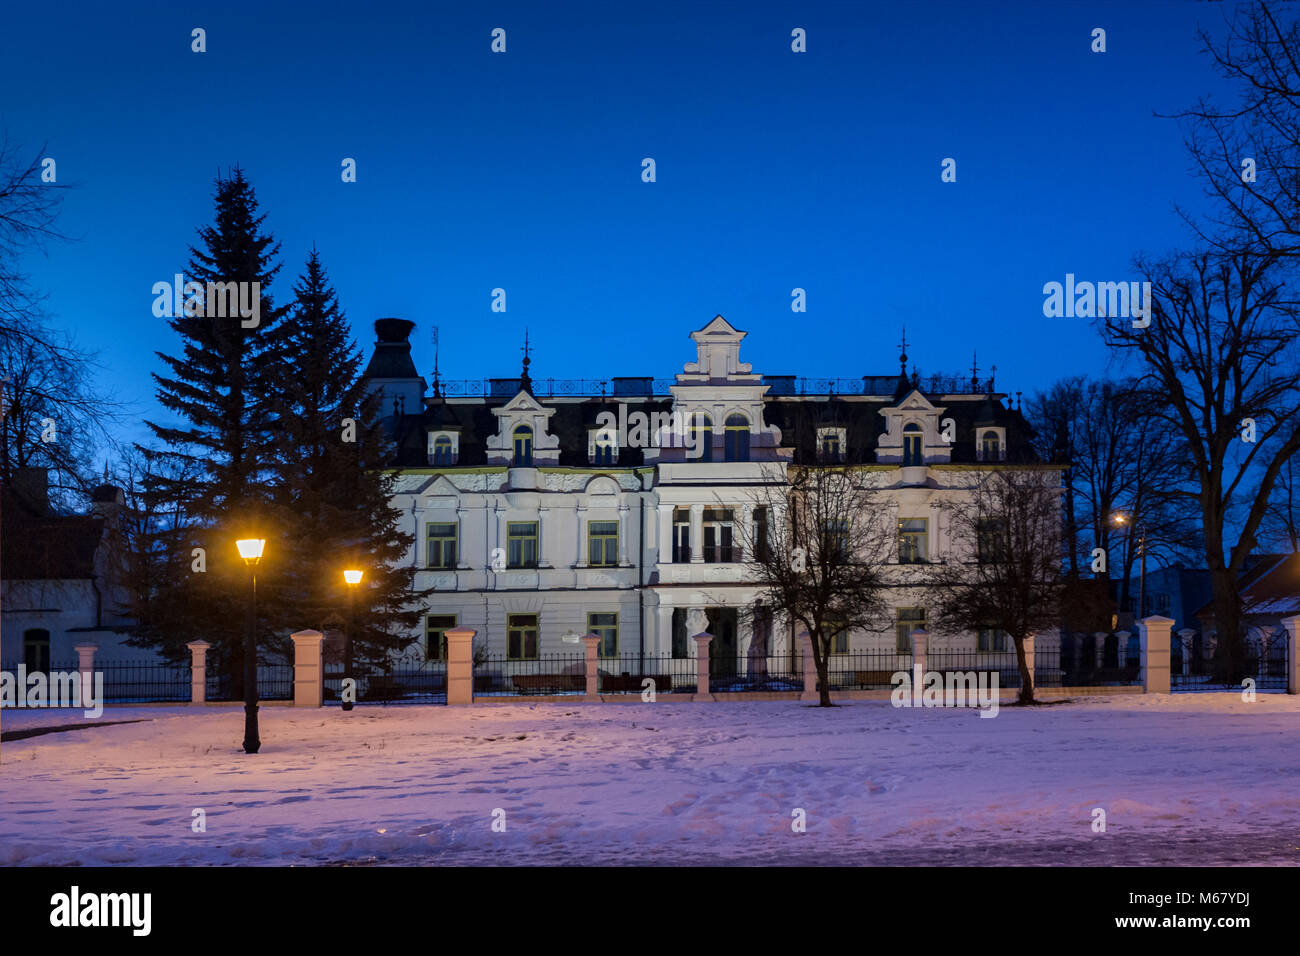 Renaissance palace in the winter at night Stock Photo